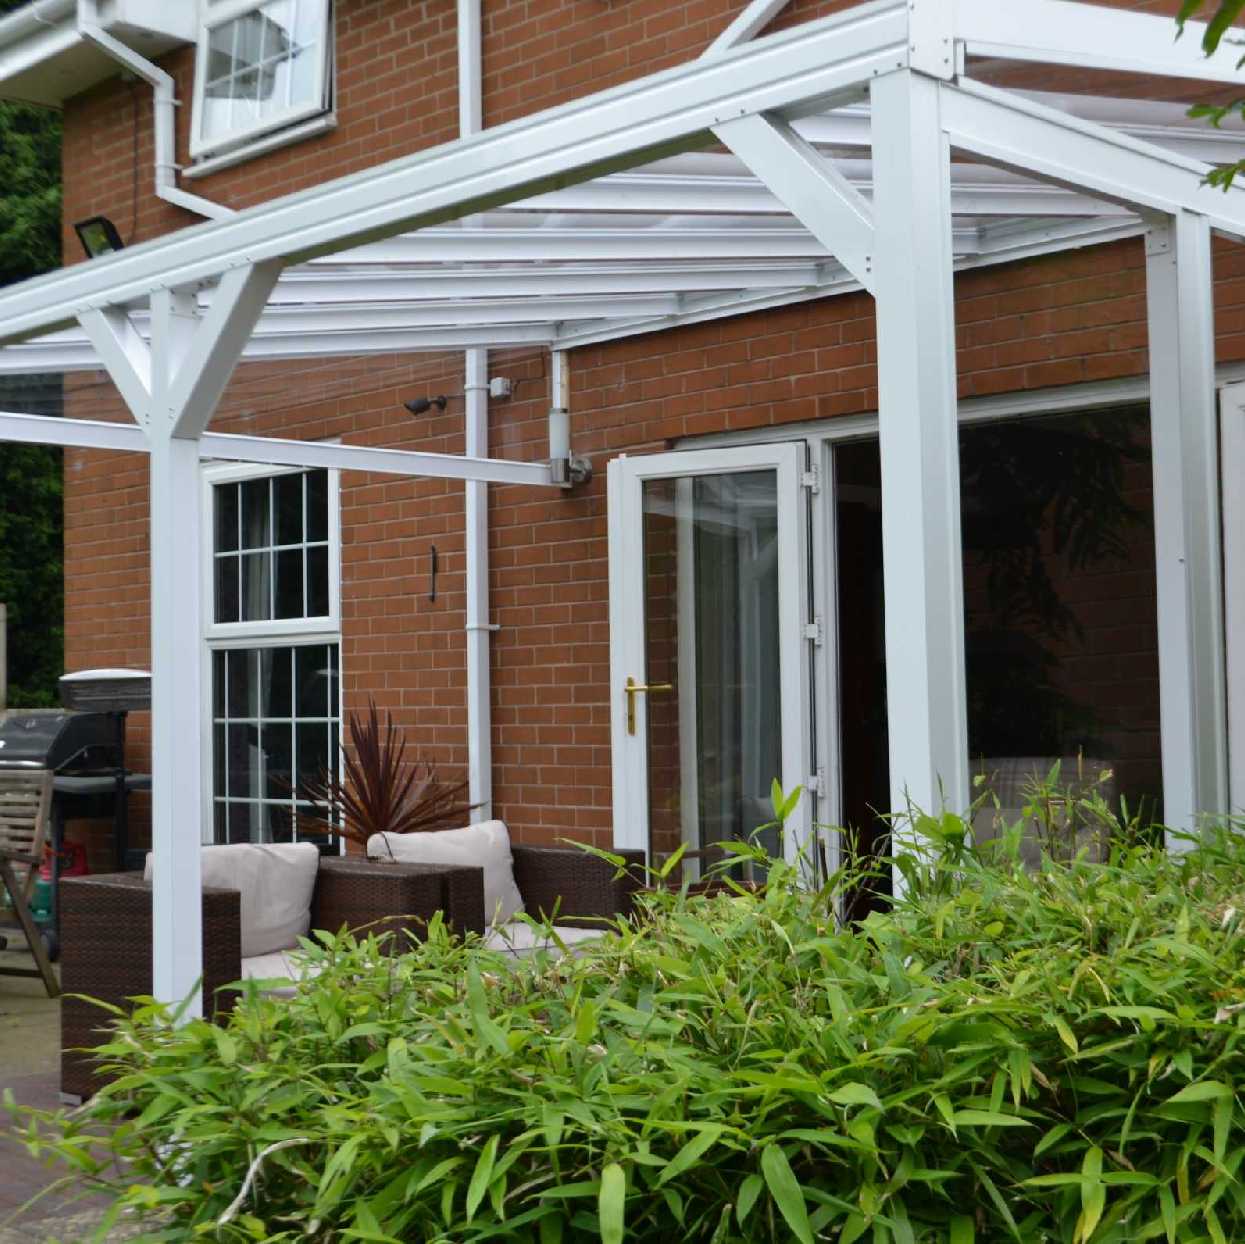 Omega Smart Lean-To Canopy, White UNGLAZED for 6mm Glazing - 7.7m (W) x 1.5m (P), (4) Supporting Posts from Omega Build